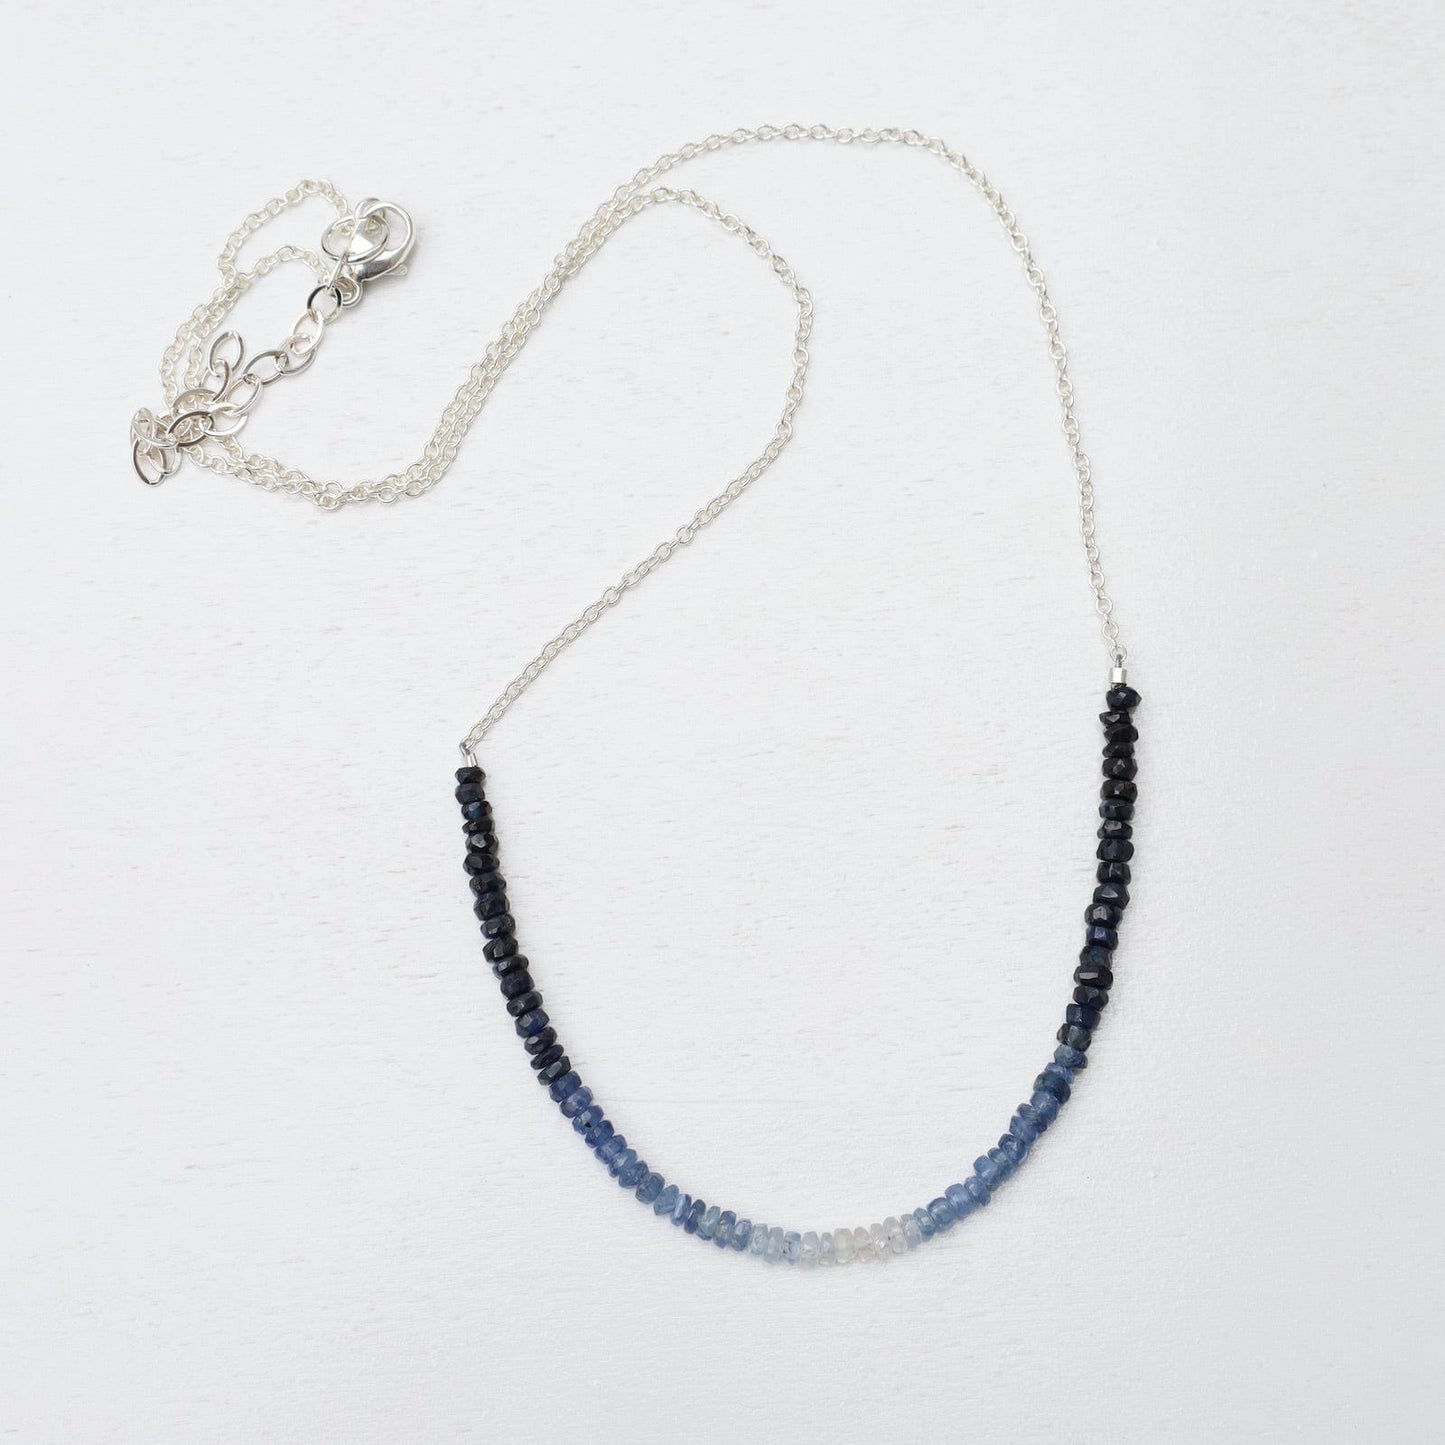 NKL Gemstone Rondelle Necklace in Sapphire Fade